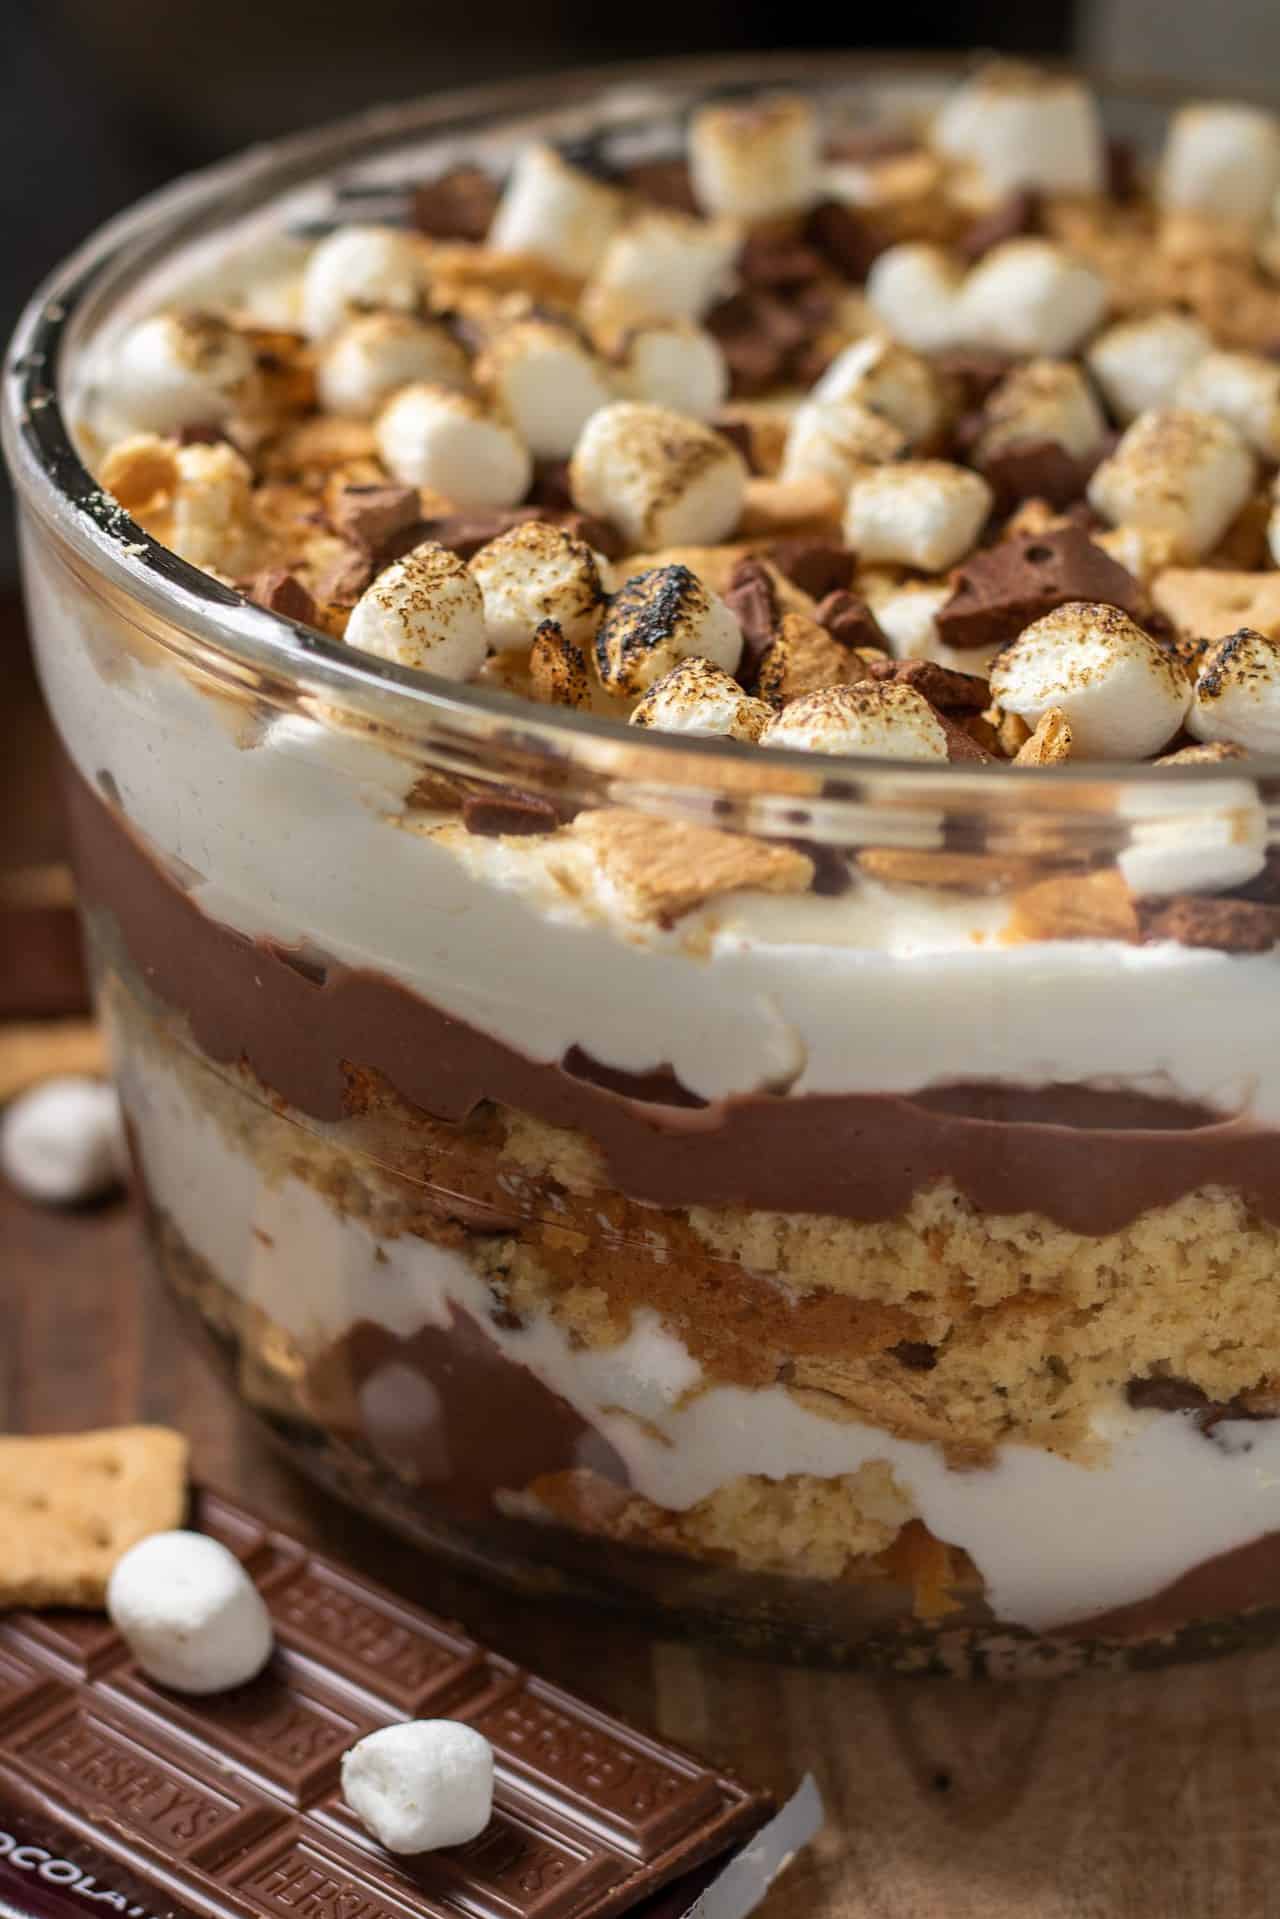 A large glass bowl on top of a wooden surface. The bowl is layered with yellow cake, chocolate pudding and whipped cream. It's topped with toasted mini marshmallows, graham cracker pieces and hershey's chocolate pieces There's a half of a hershey's chocolate bar next to it with some mini marshmallows and half of a graham cracker